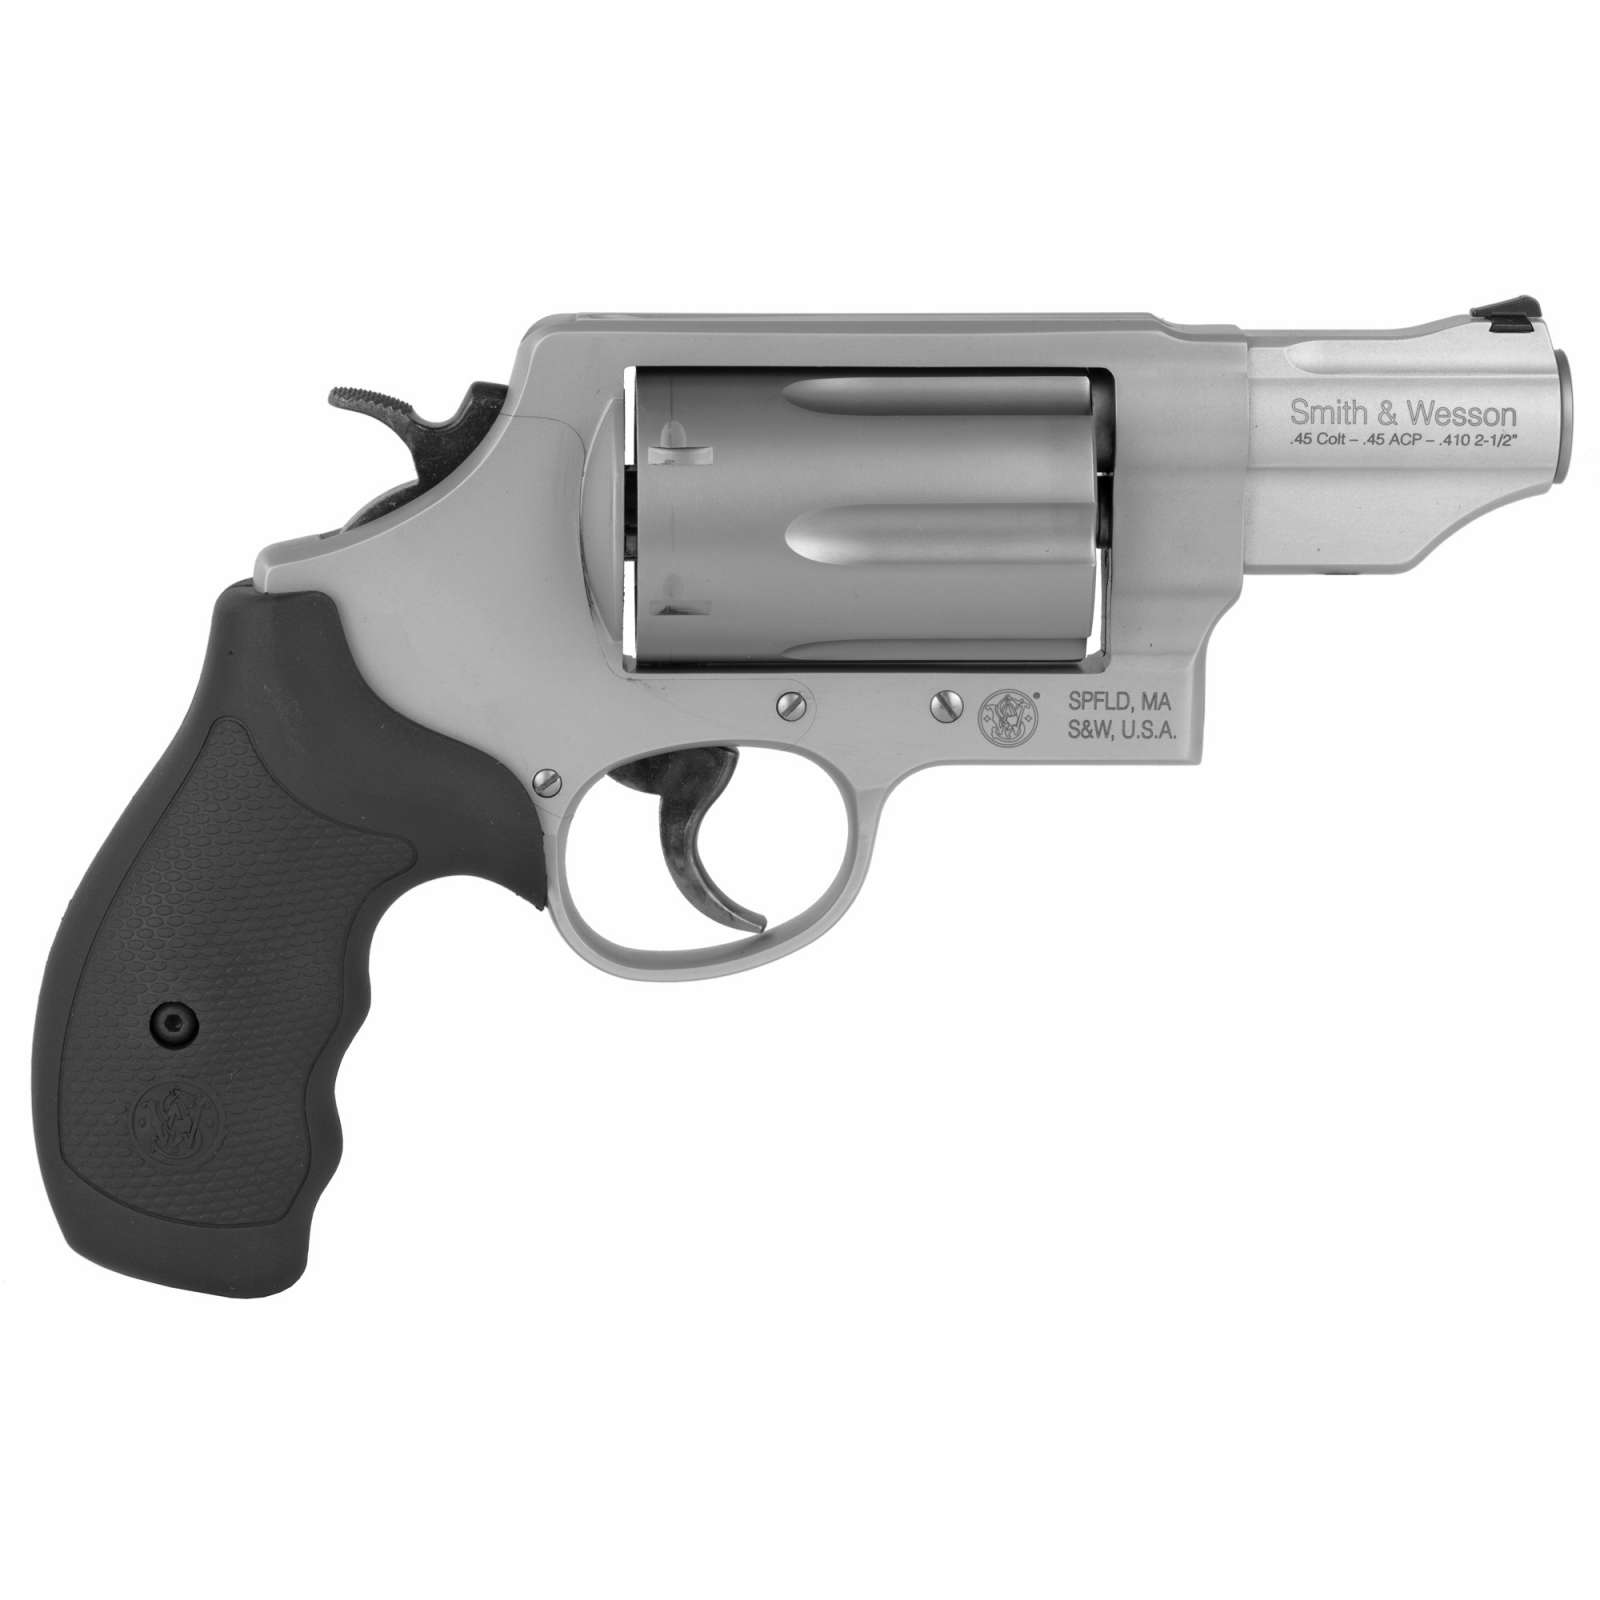 Smith & Wesson 160410 Governor 45 Colt/45 ACP/410 6Rnd 2.75 Stainless Steel-img-1